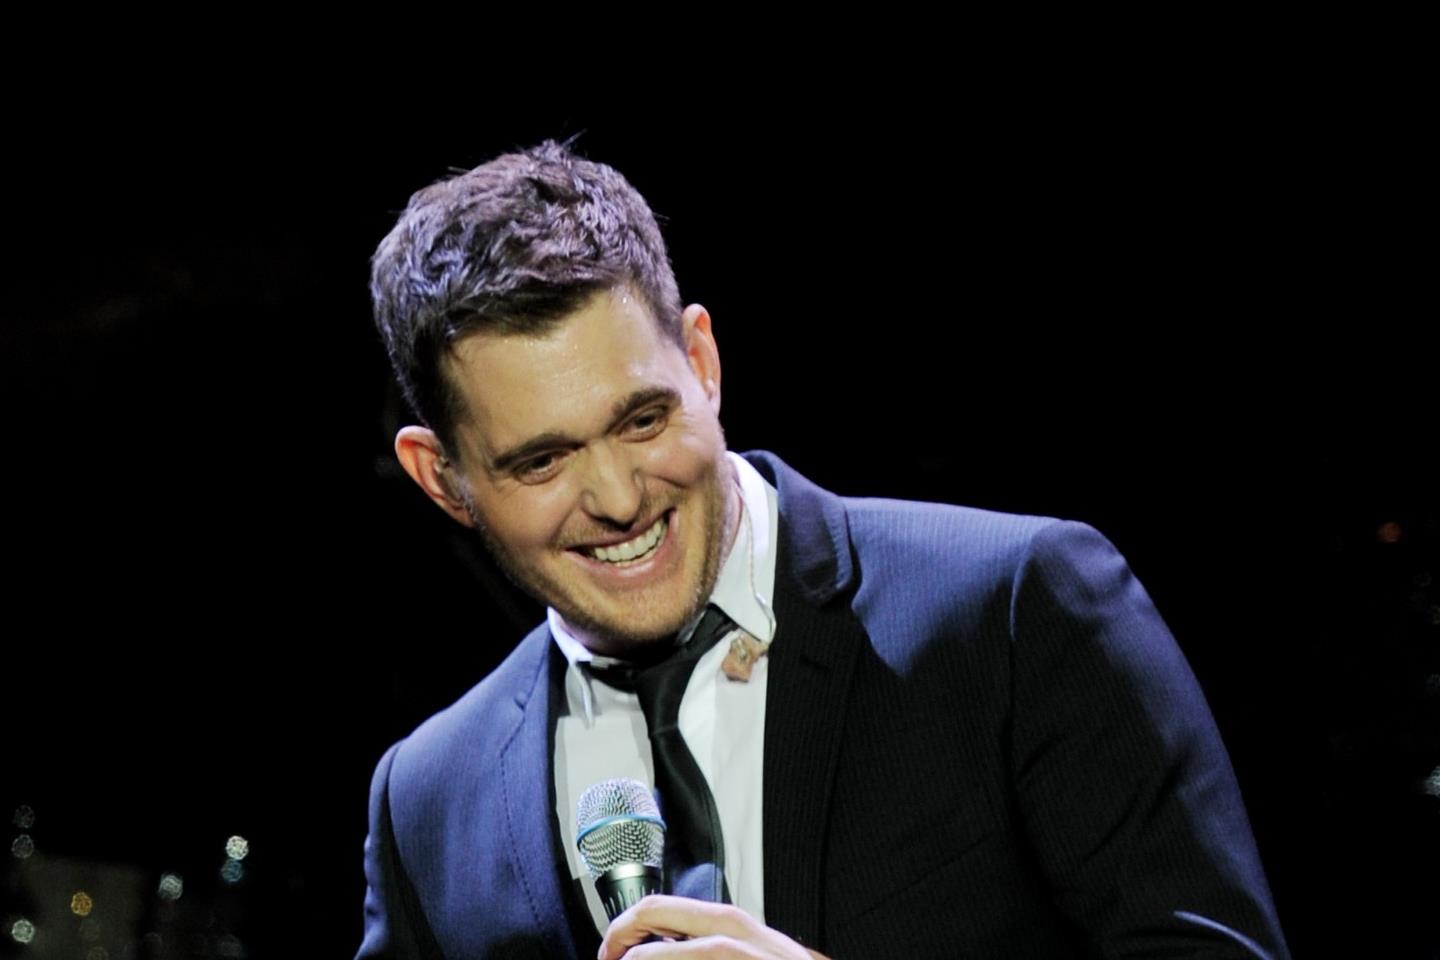 Michael Buble Tickets | Michael Buble Tour 2023 and Concert Tickets